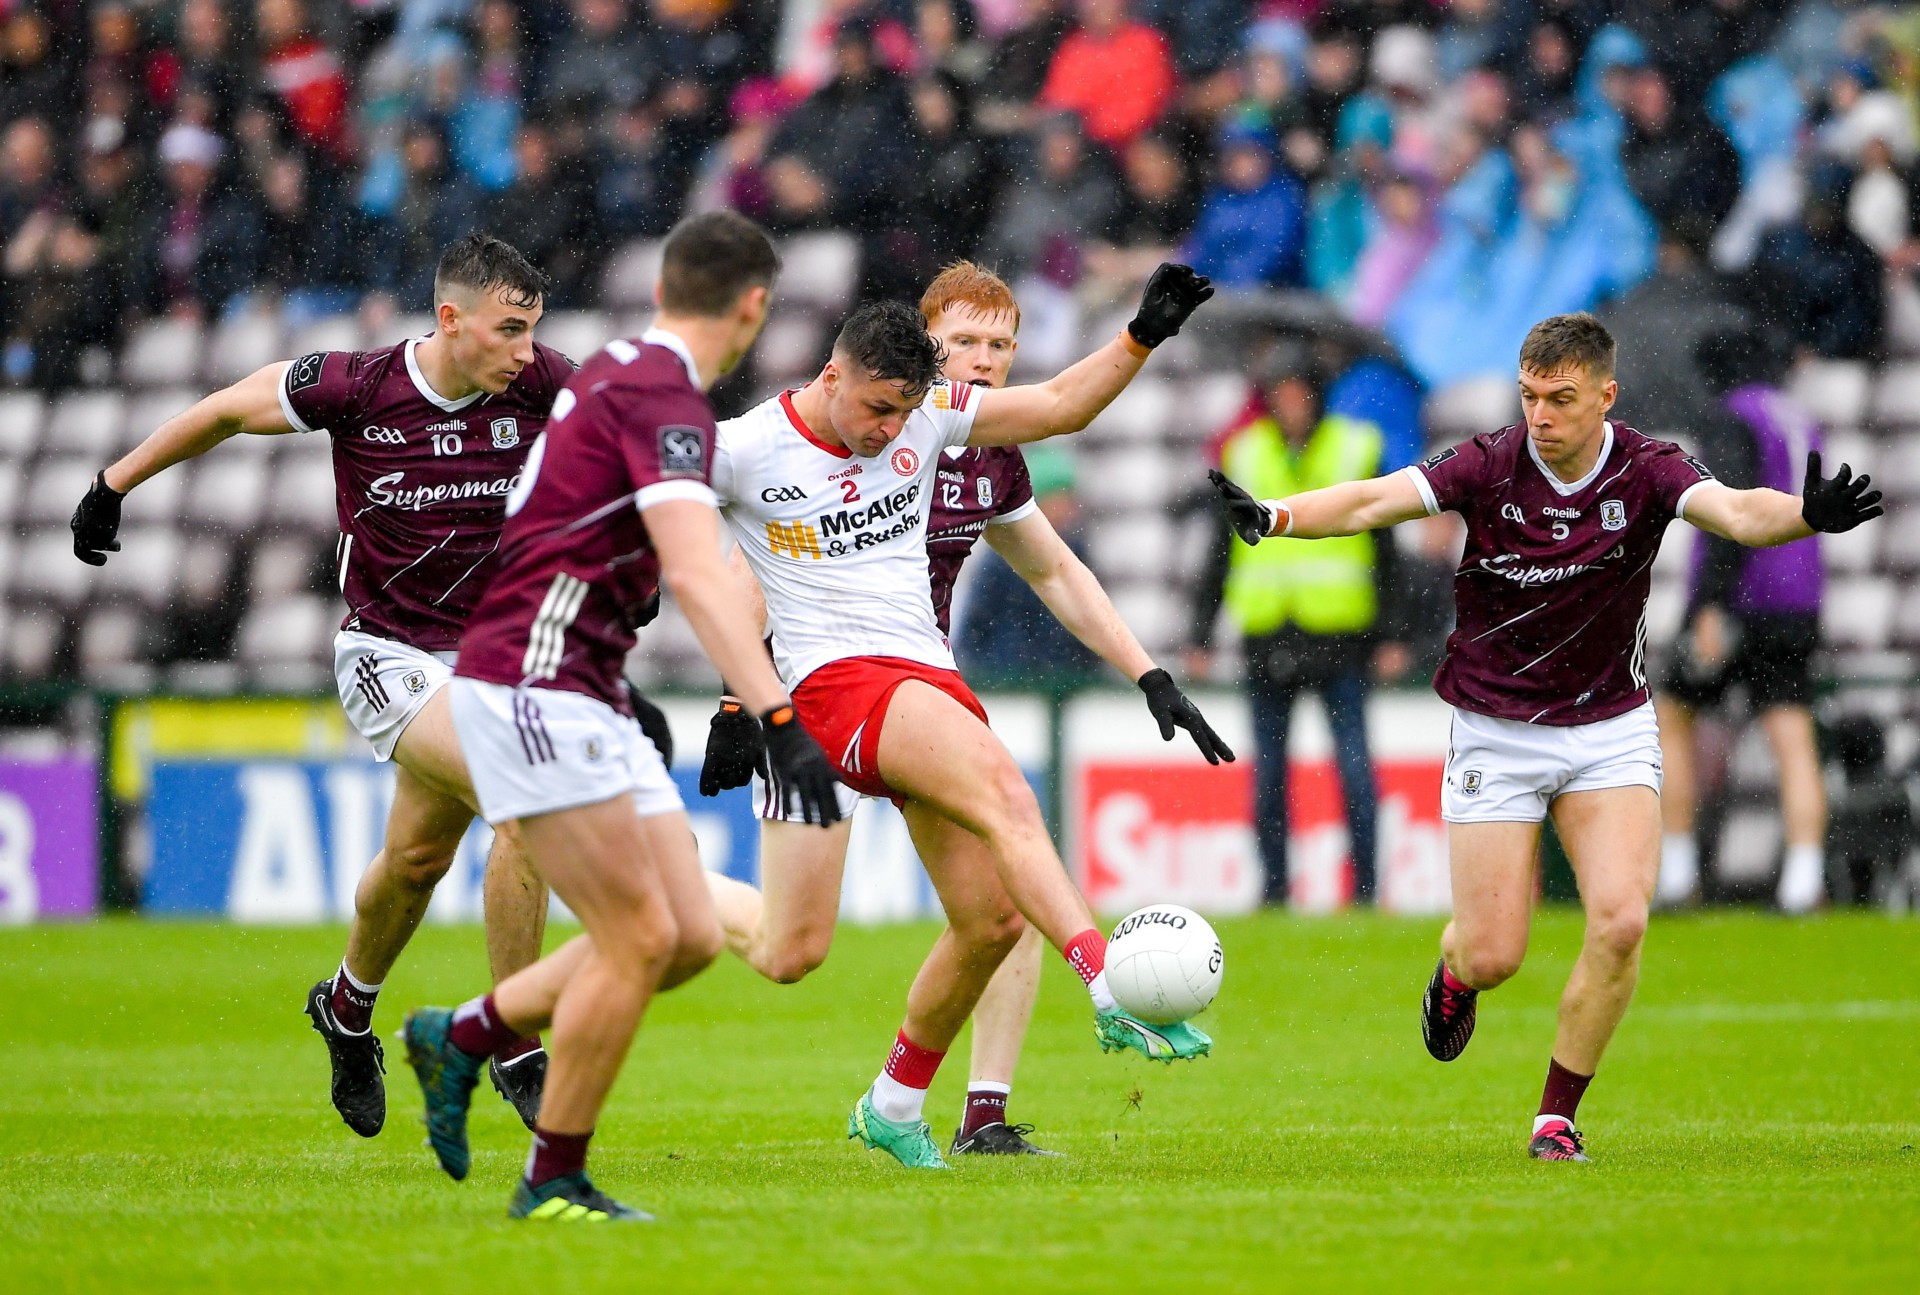 Tyrone fall short in group stage opener against Galway